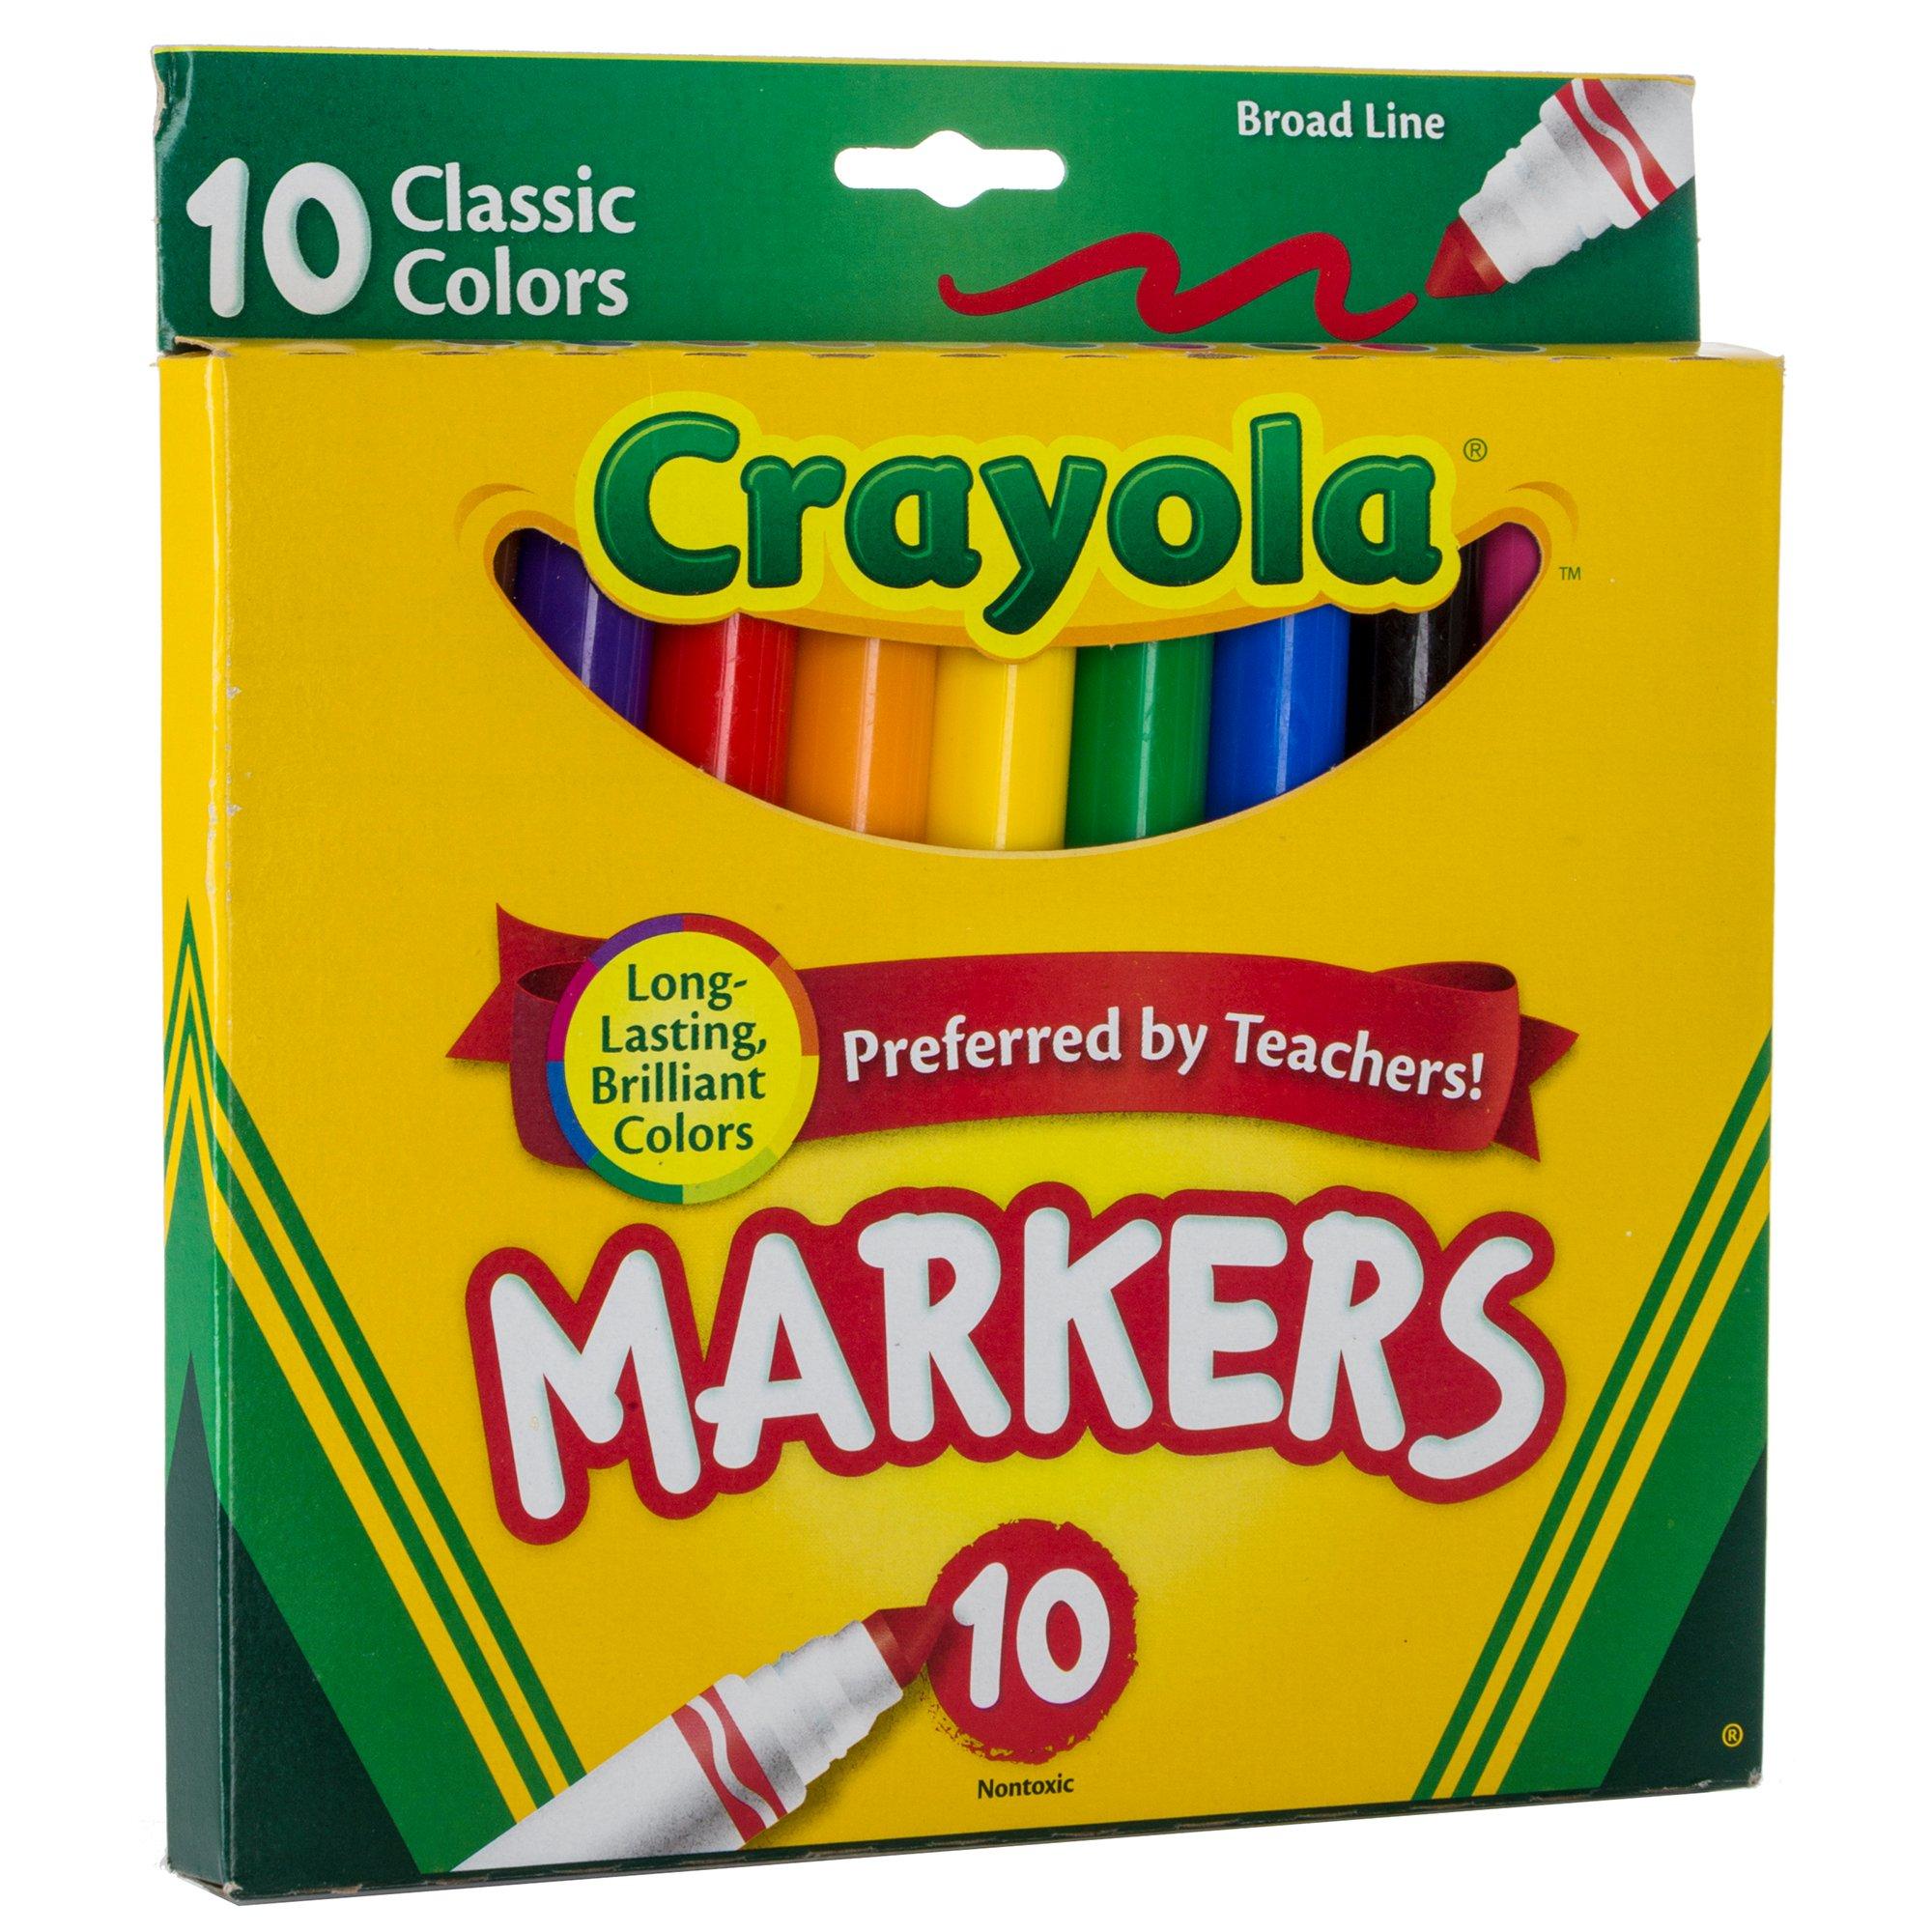 Crayola Colors of Kindness Washable Markers, 10 pk - Kroger